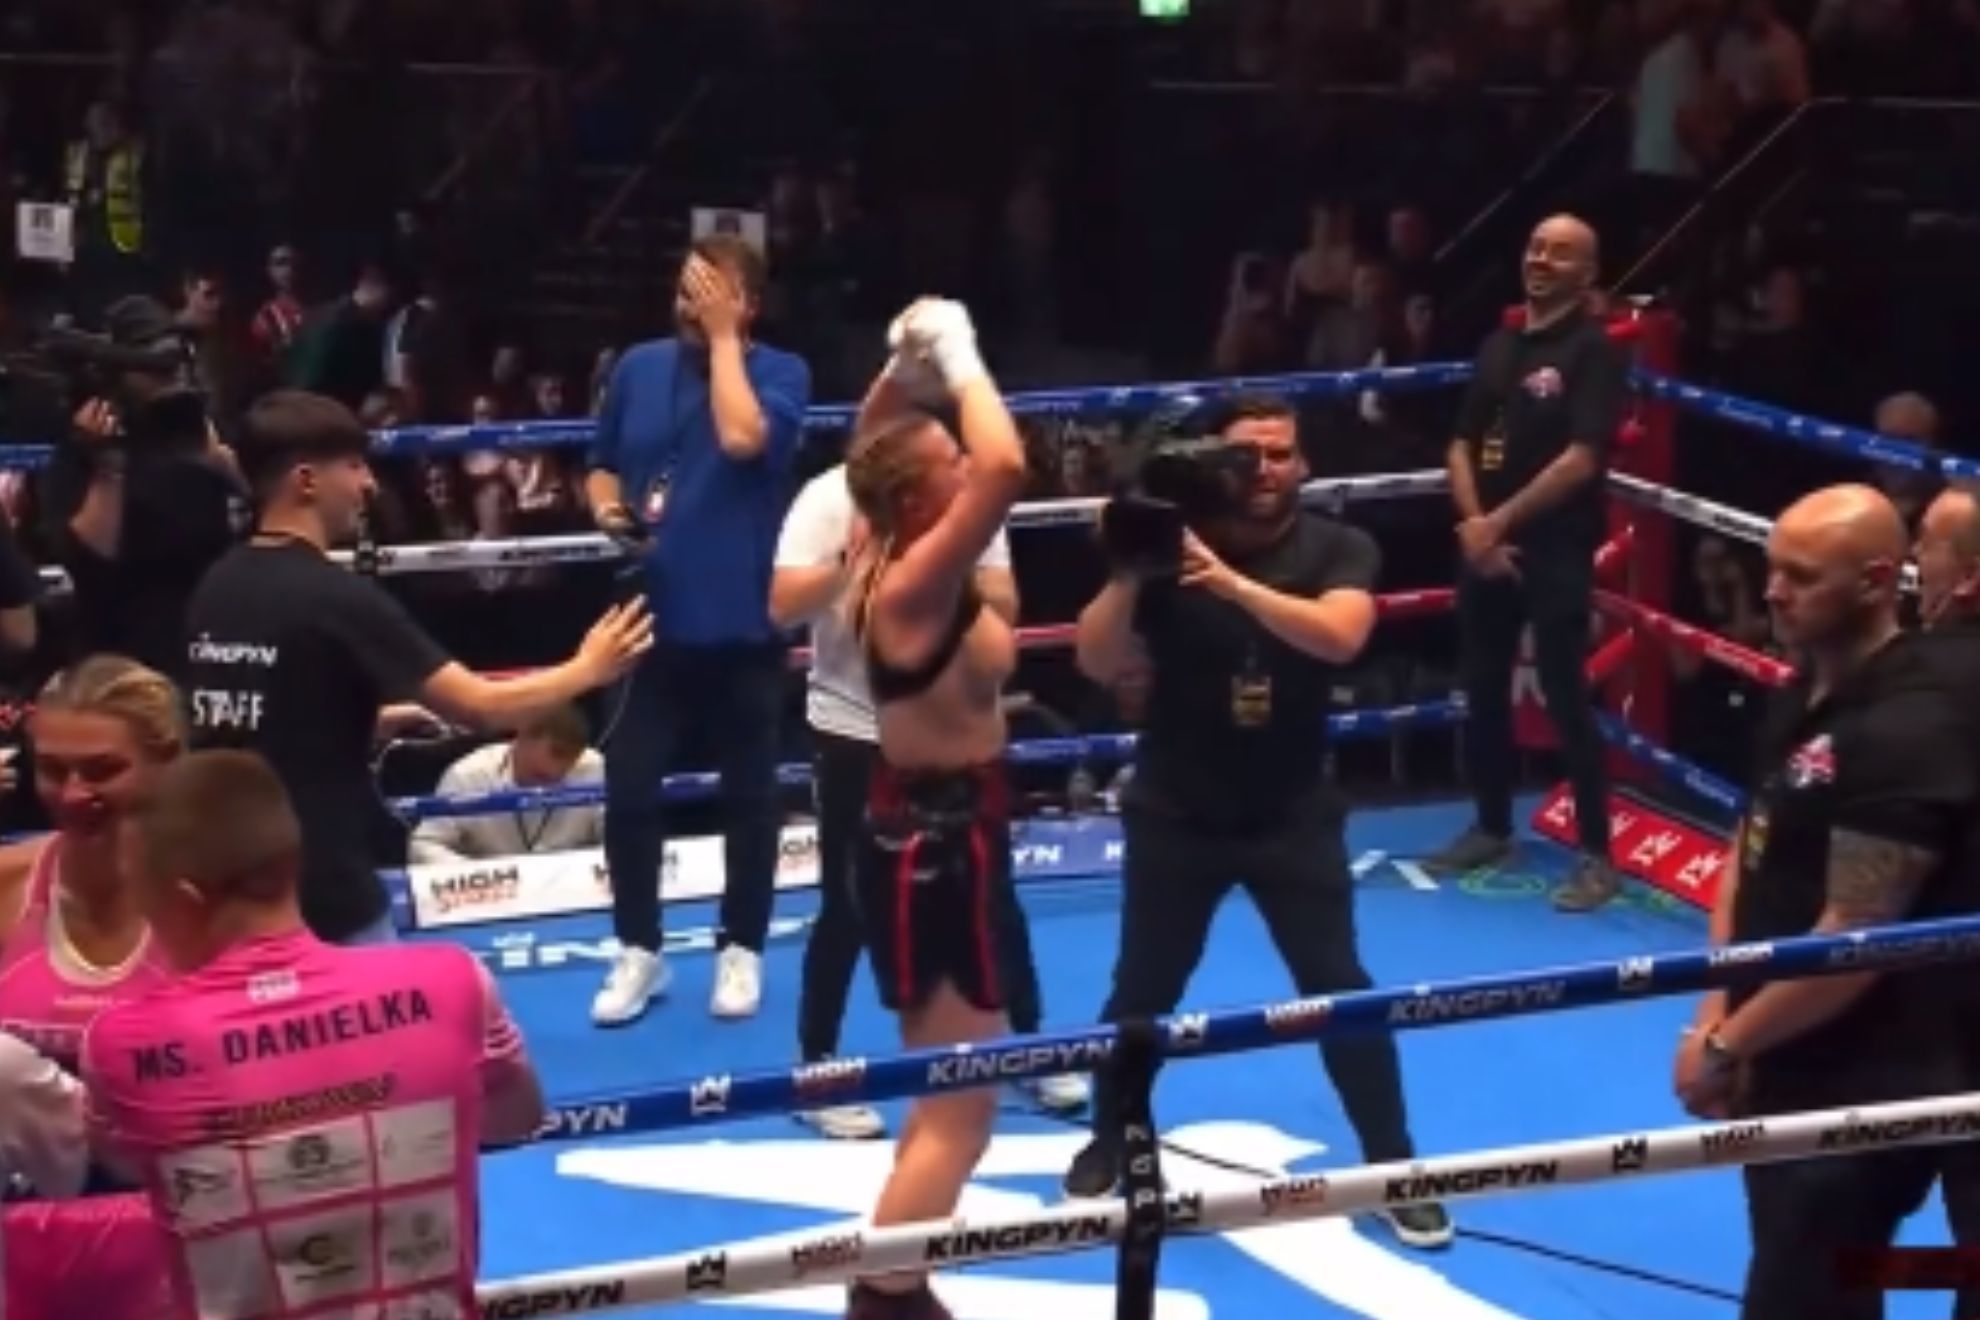 fighter flashes crowd after win